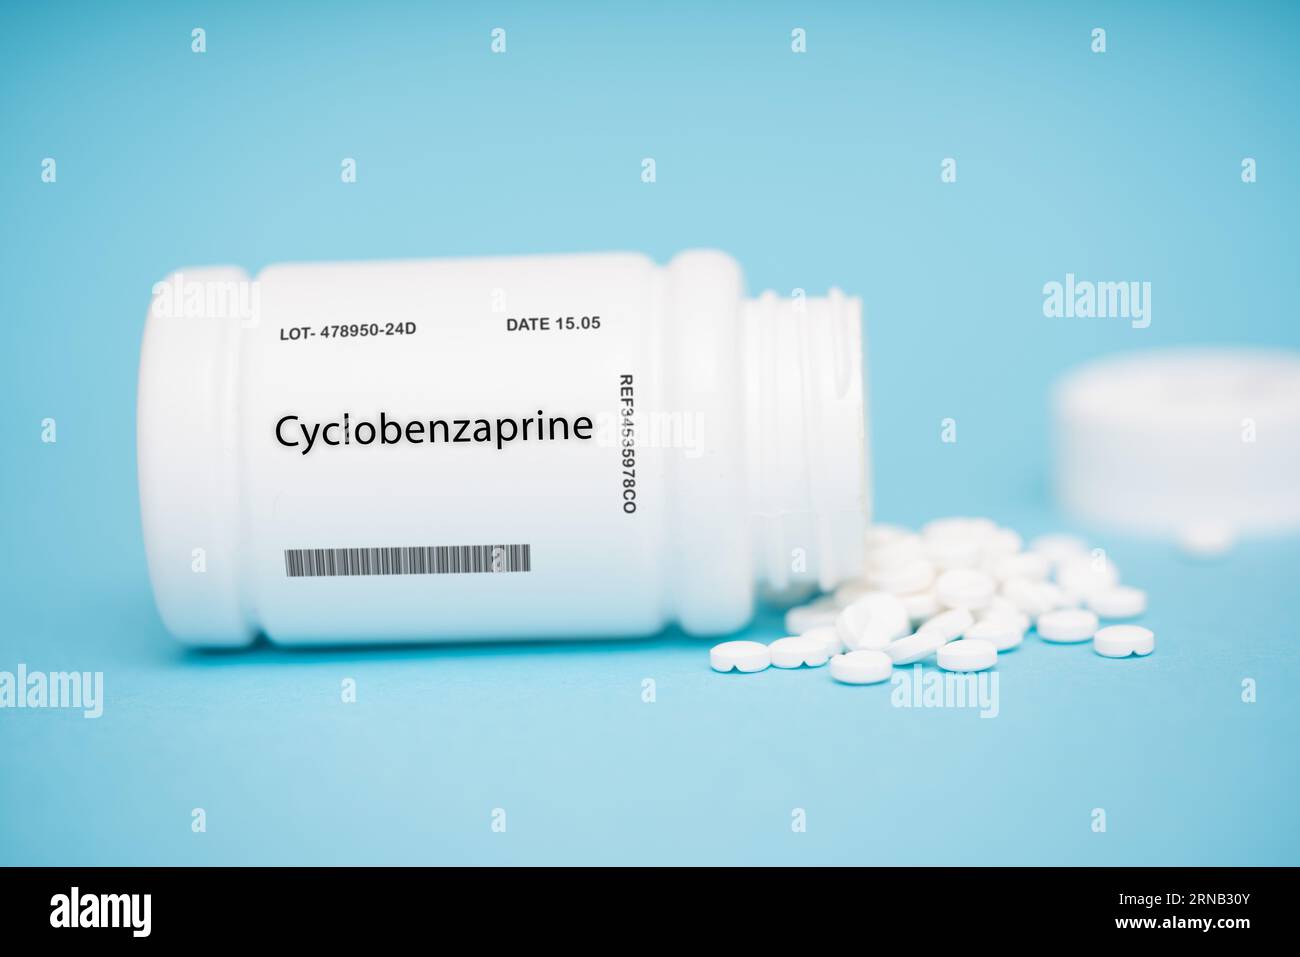 Cyclobenzaprine A medication used to treat muscle spasms and pain Muscle spasms pain Tablet Stock Photo